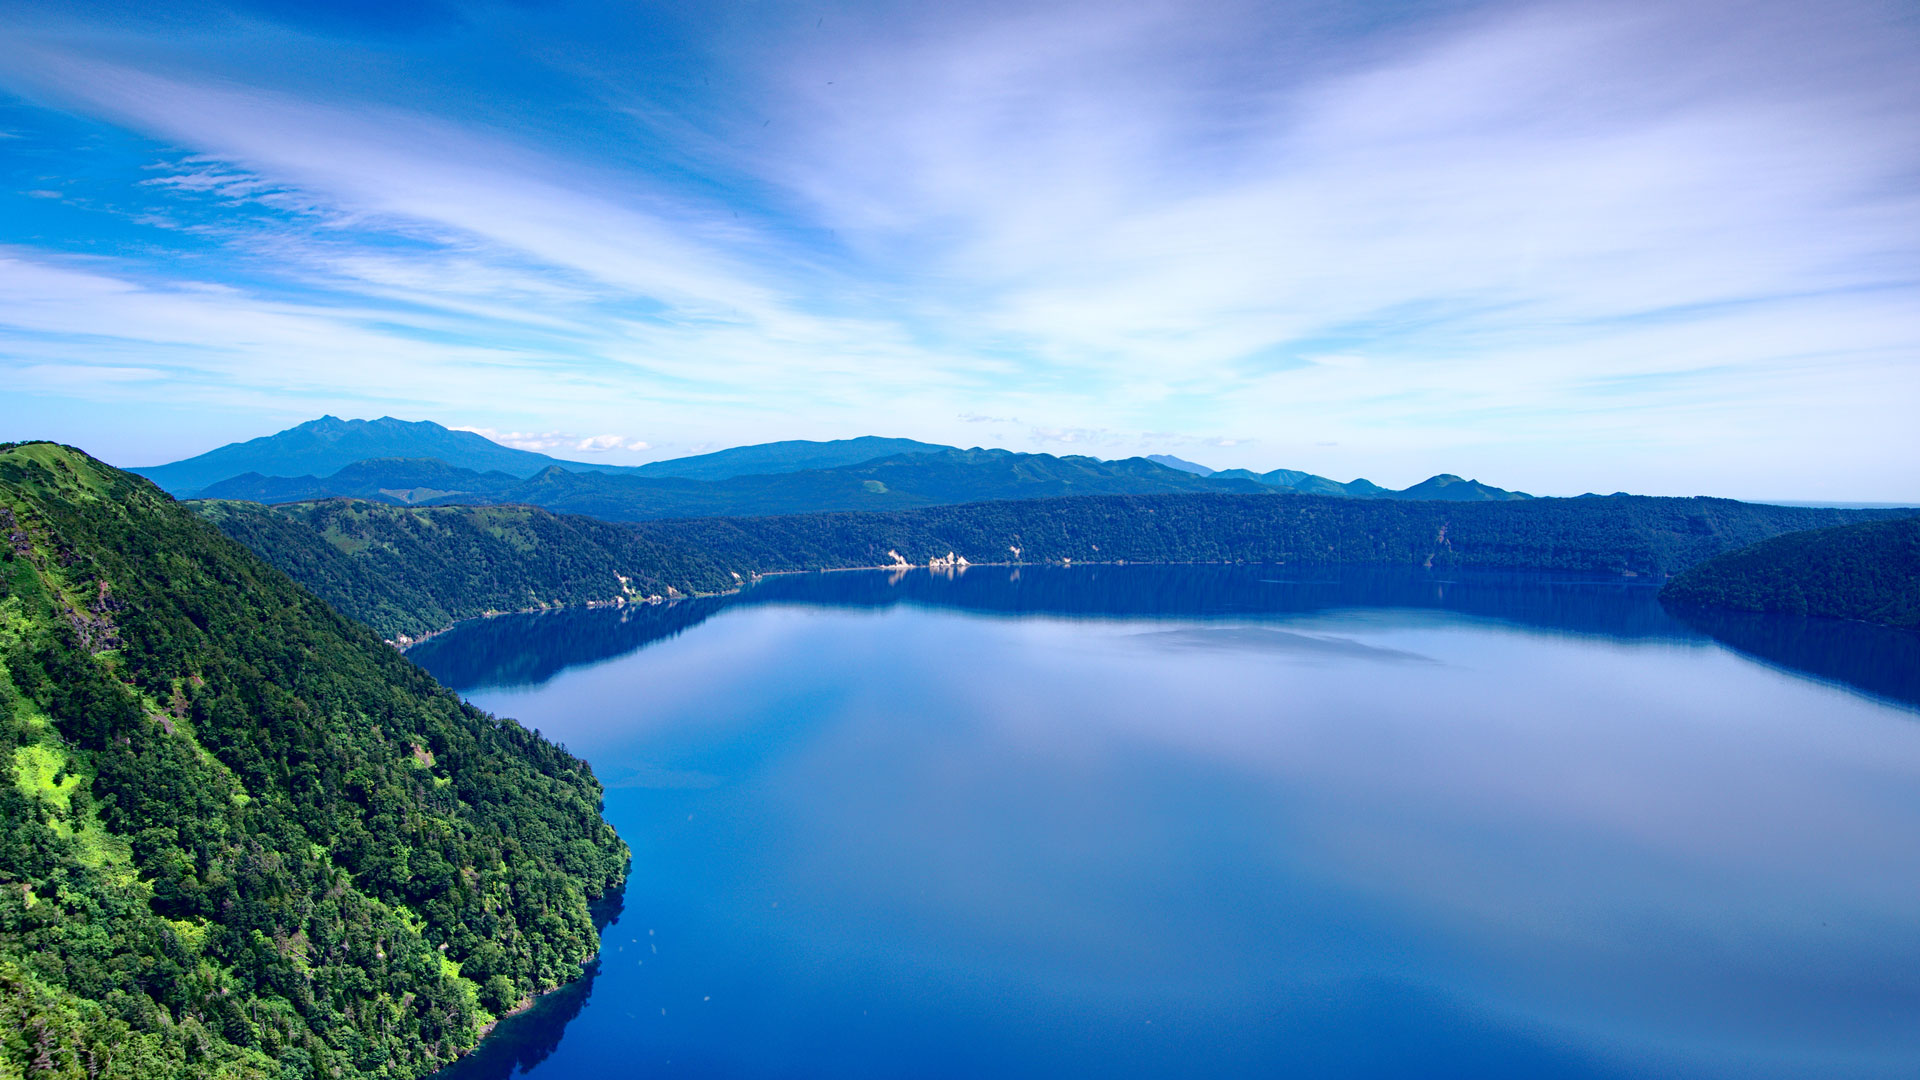 Landscape image of vivid blue sky with deep blue scenary of a lake surrounded by green terrain.